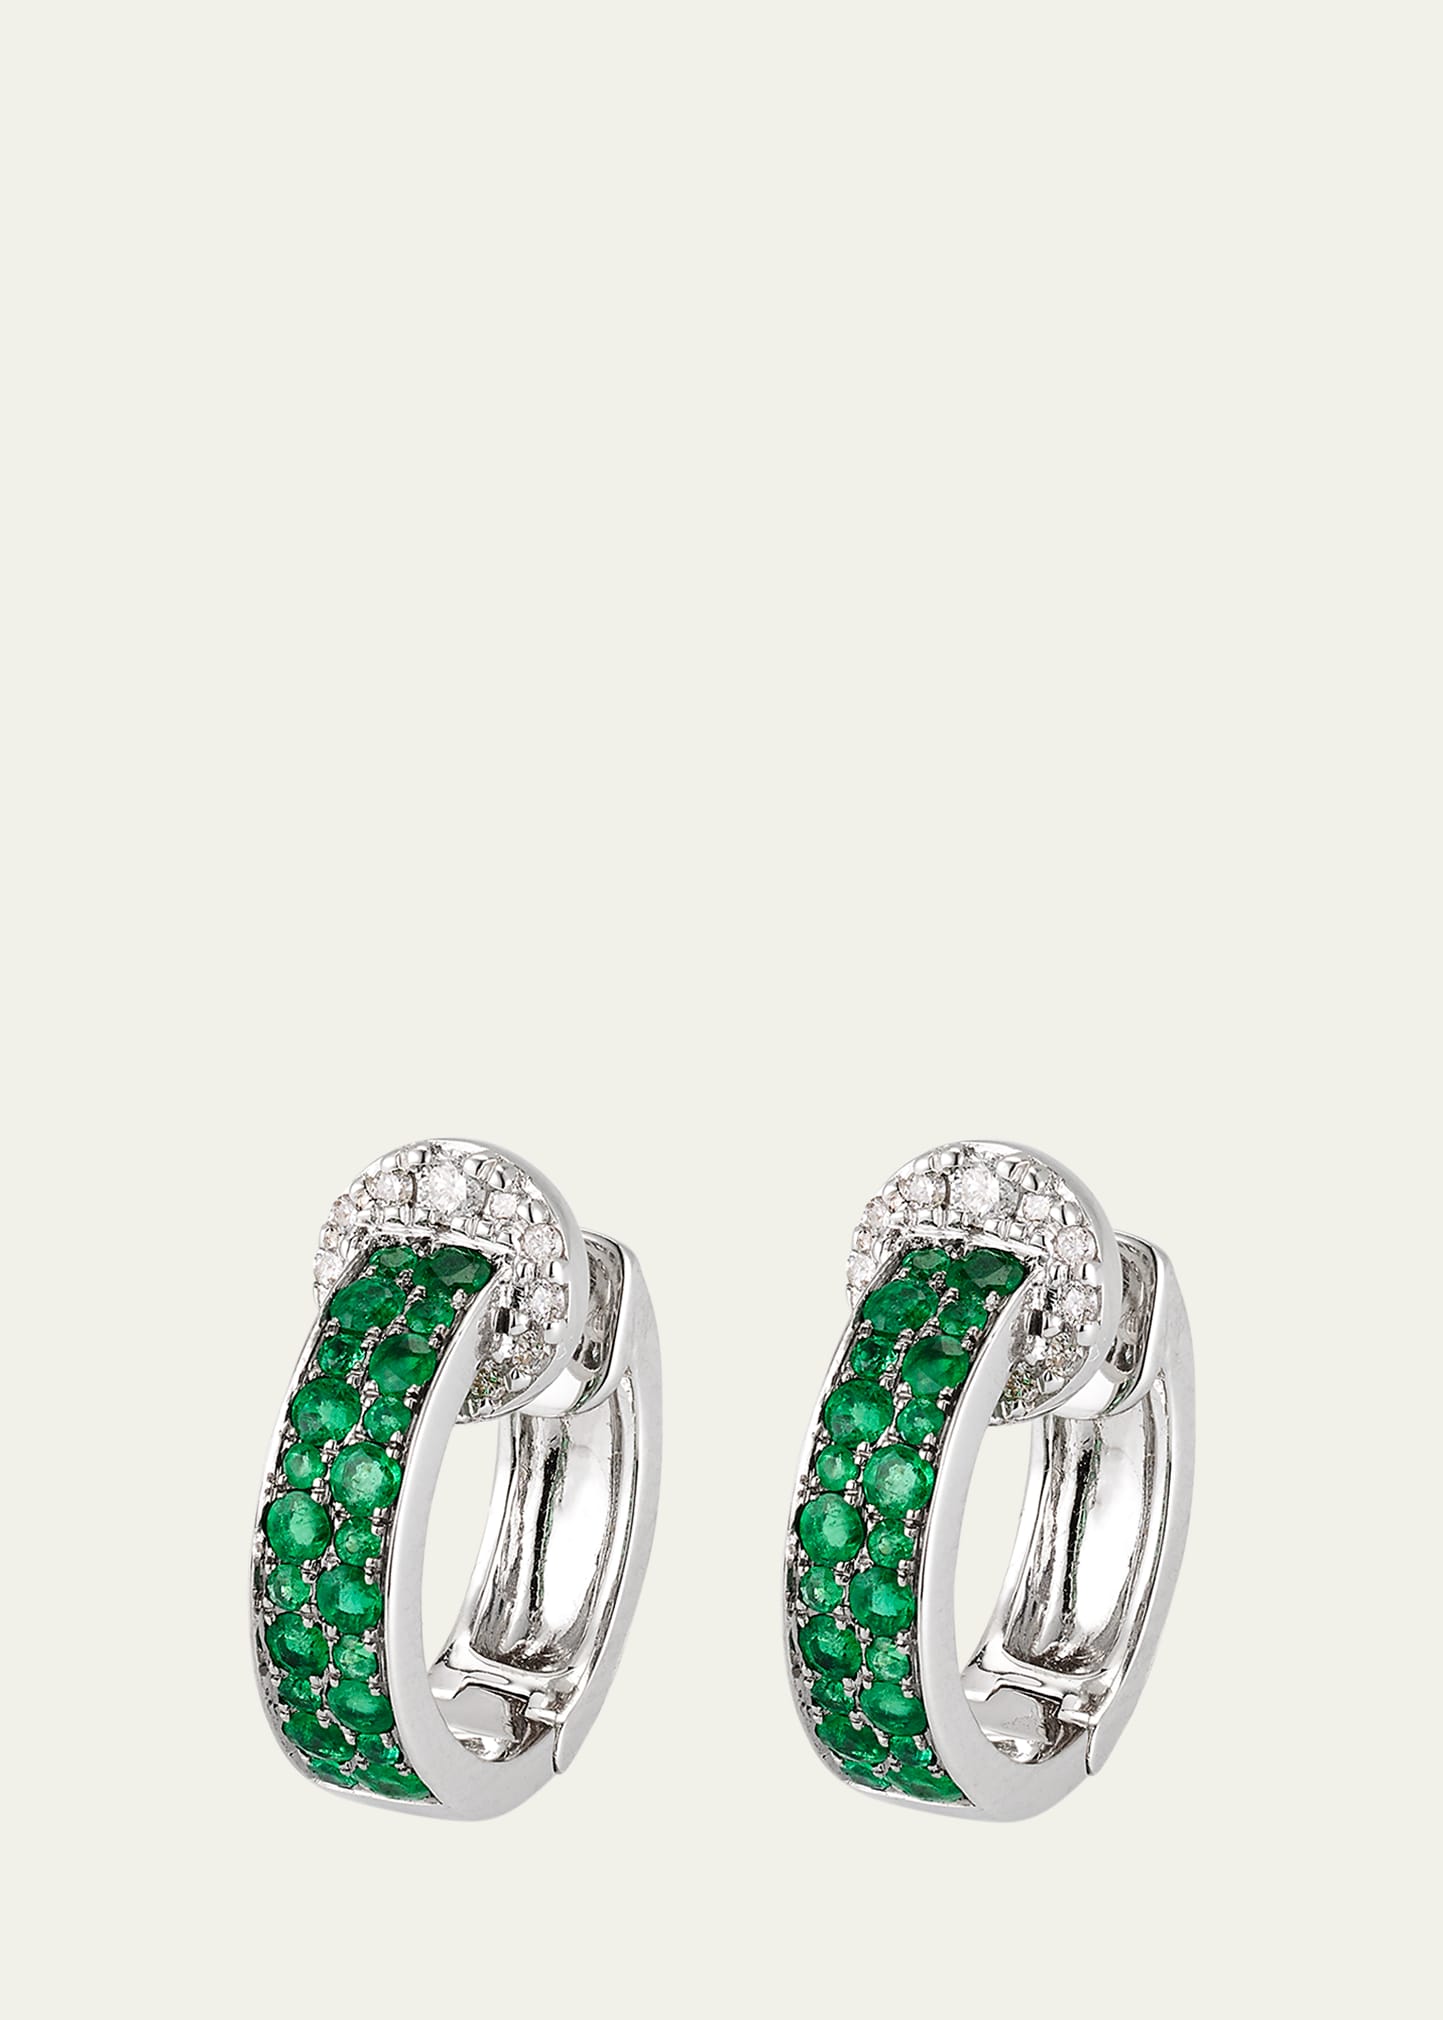 18K White Gold Hoop Earrings with Diamonds and Emeralds